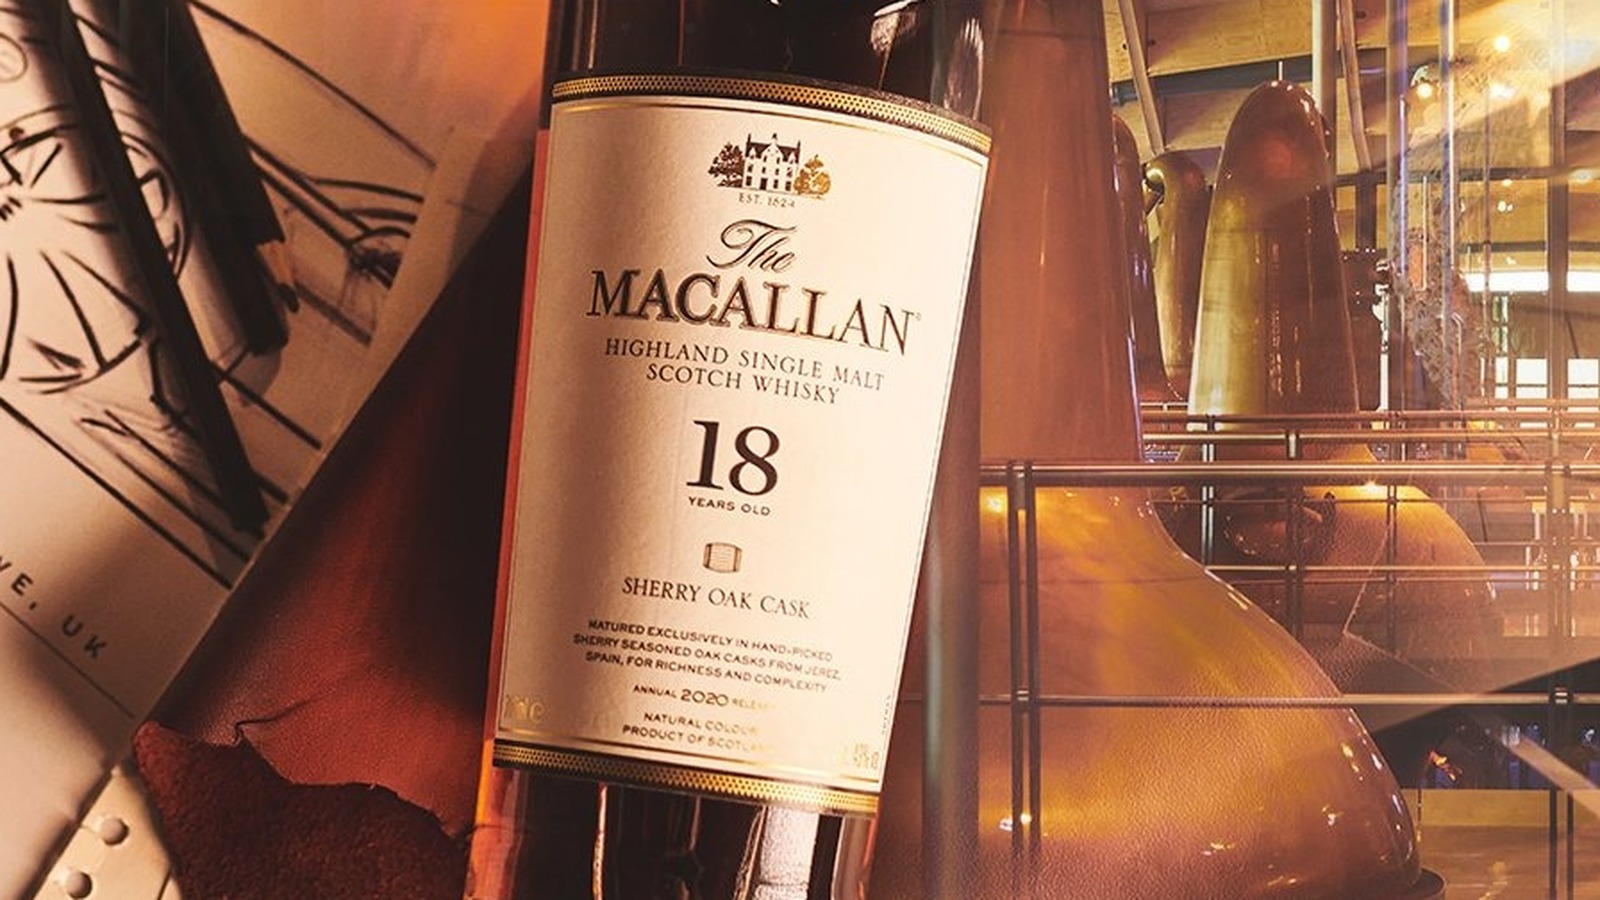 https://www.tastingtable.com/img/gallery/the-macallan-18-year-sherry-oak-whisky-the-ultimate-bottle-guide/l-intro-1701437696.jpg